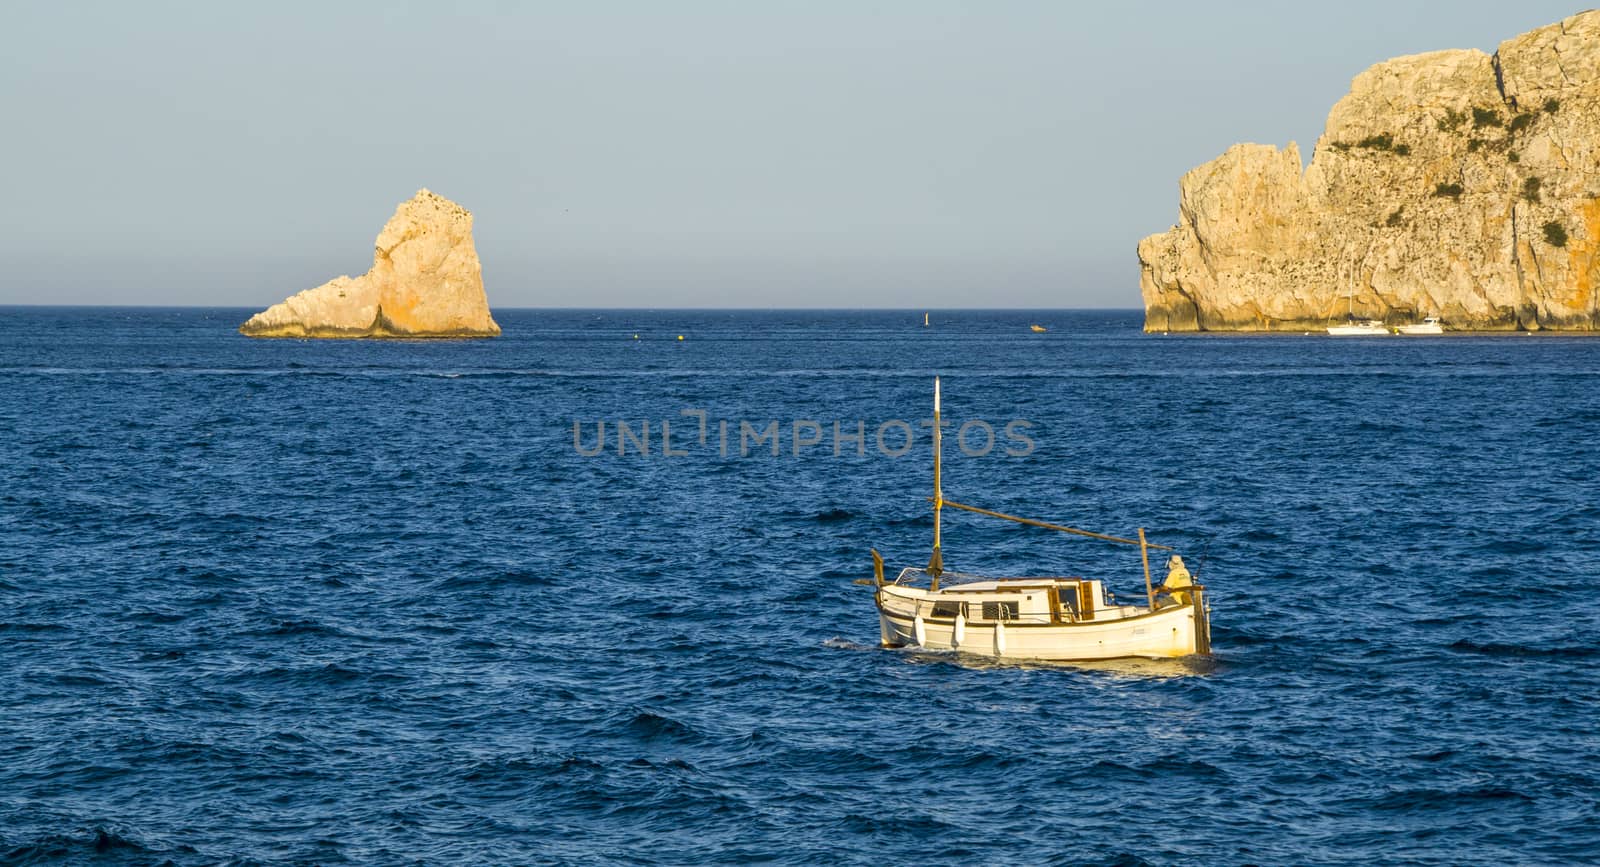 Fisherman's boat sailing in Medes islands, mediterranean sea by tanaonte